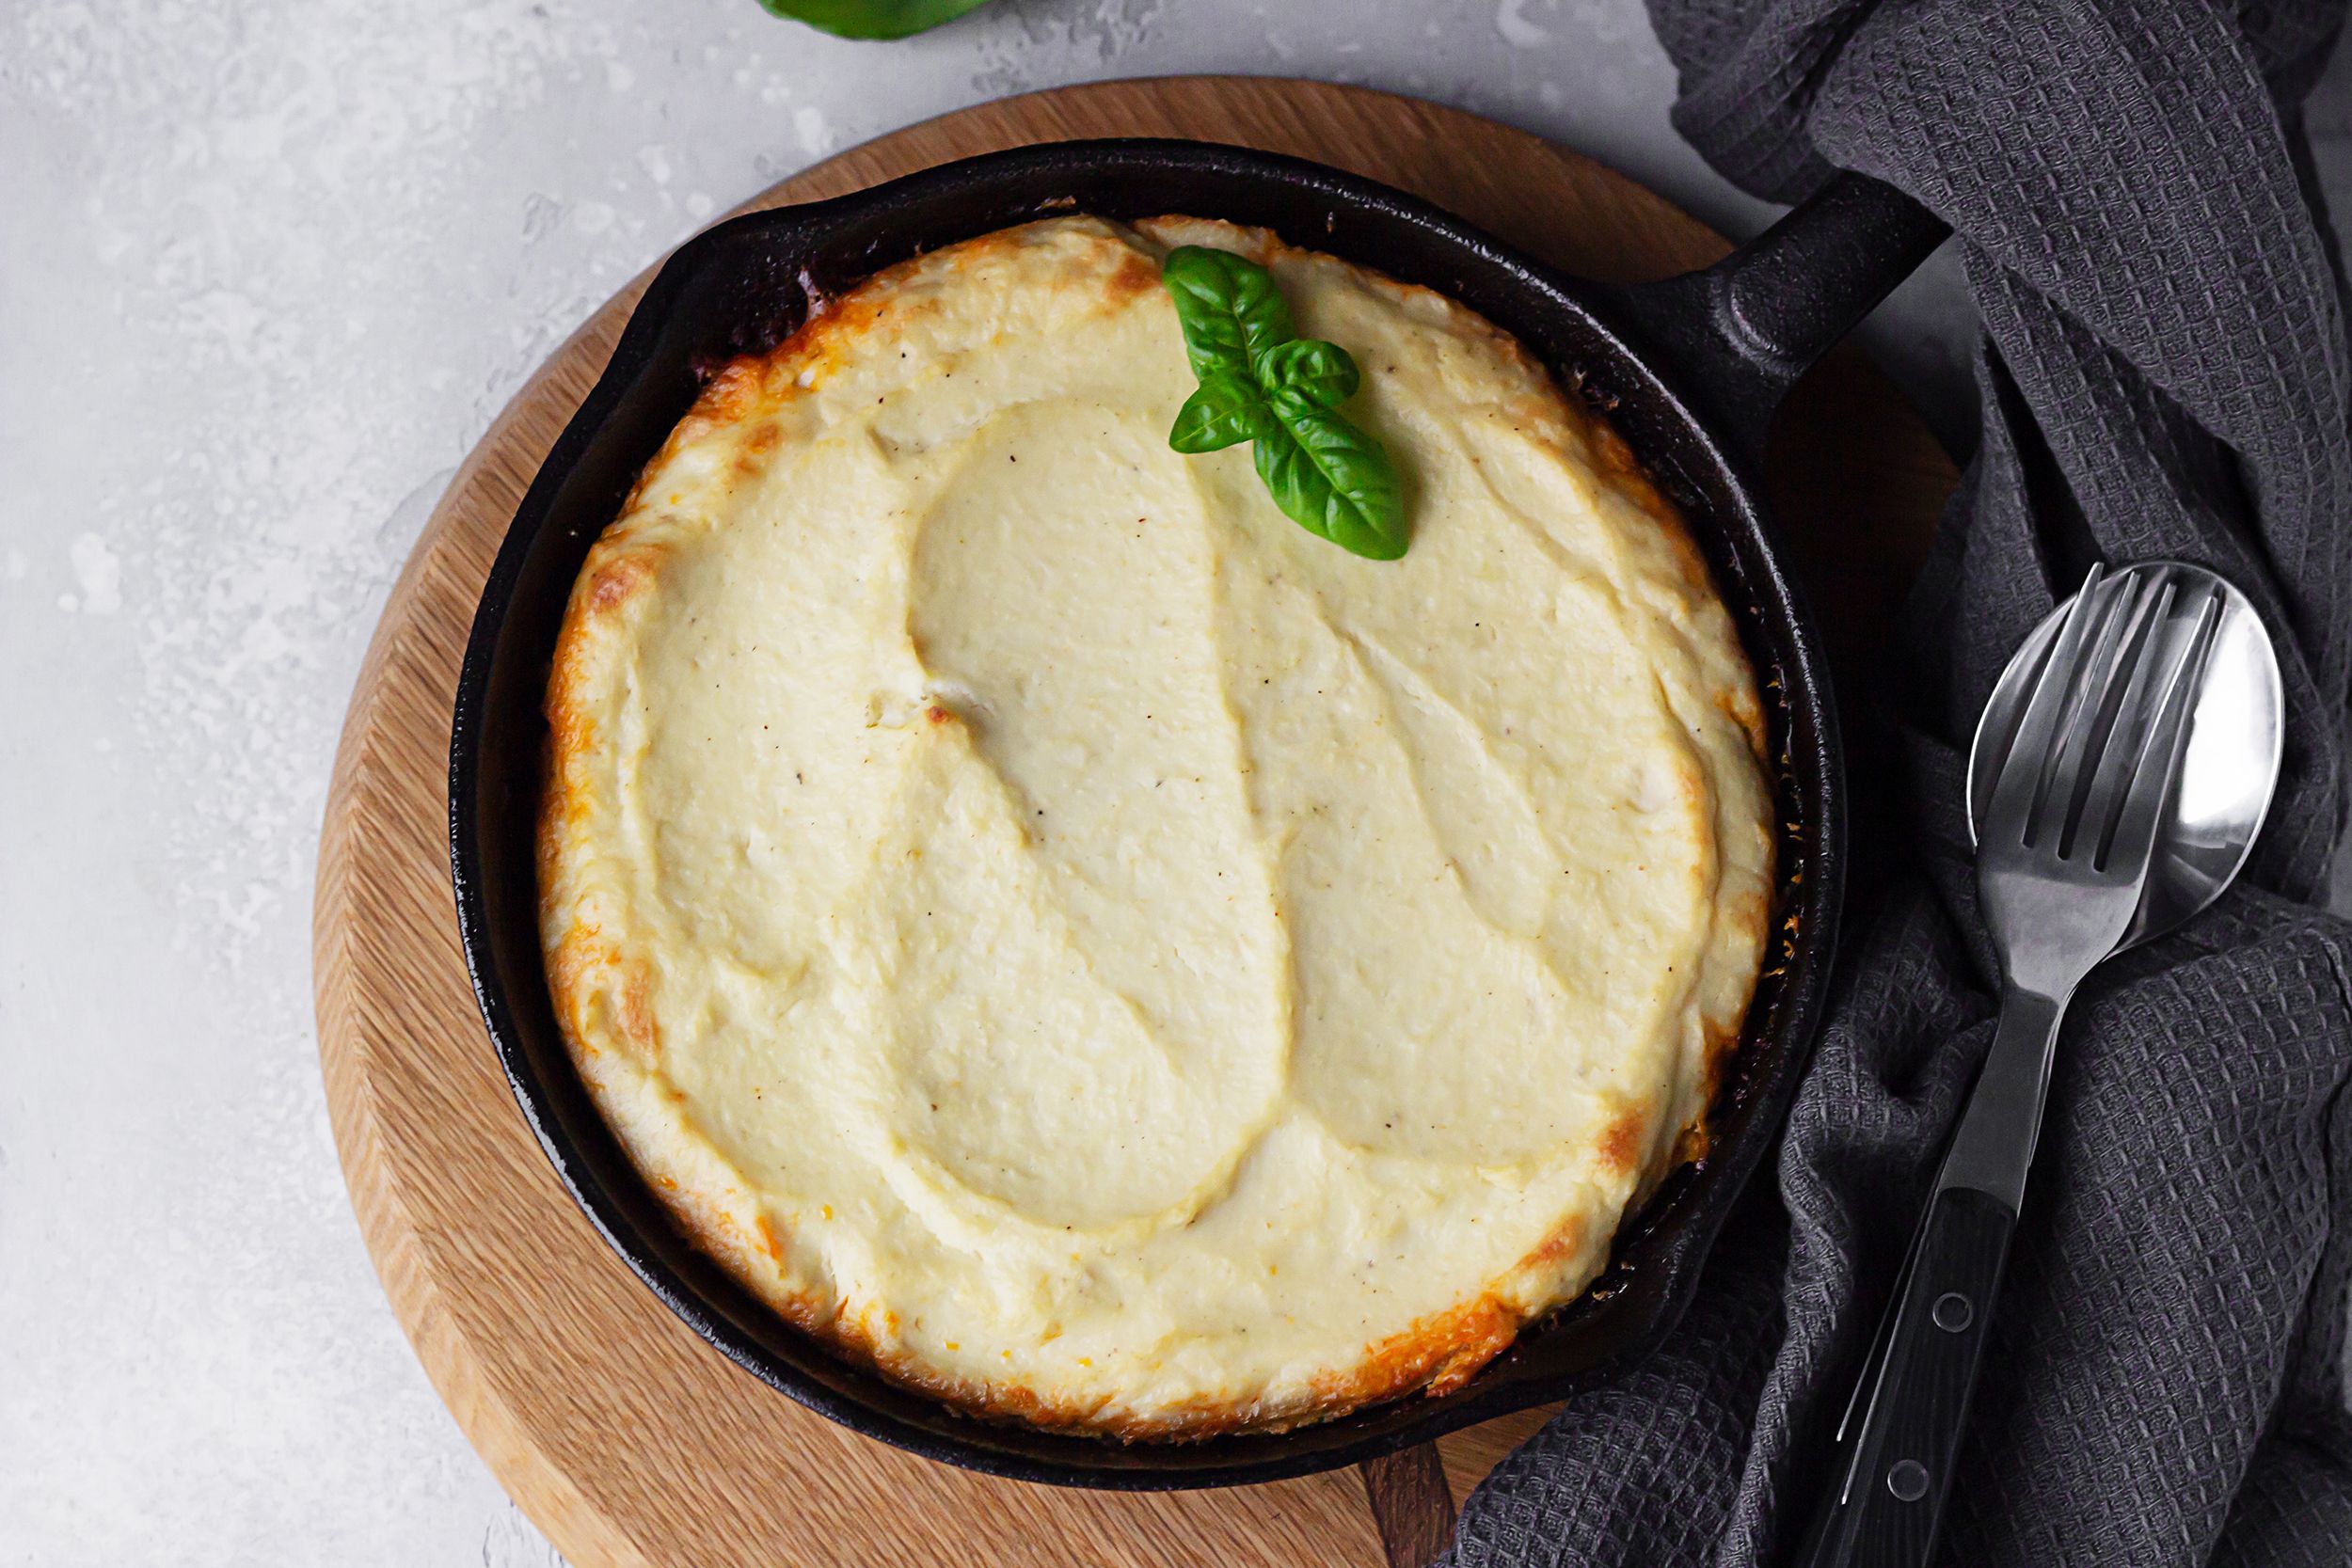 How A Cast Iron Skillet Can Help You Make Better Pies